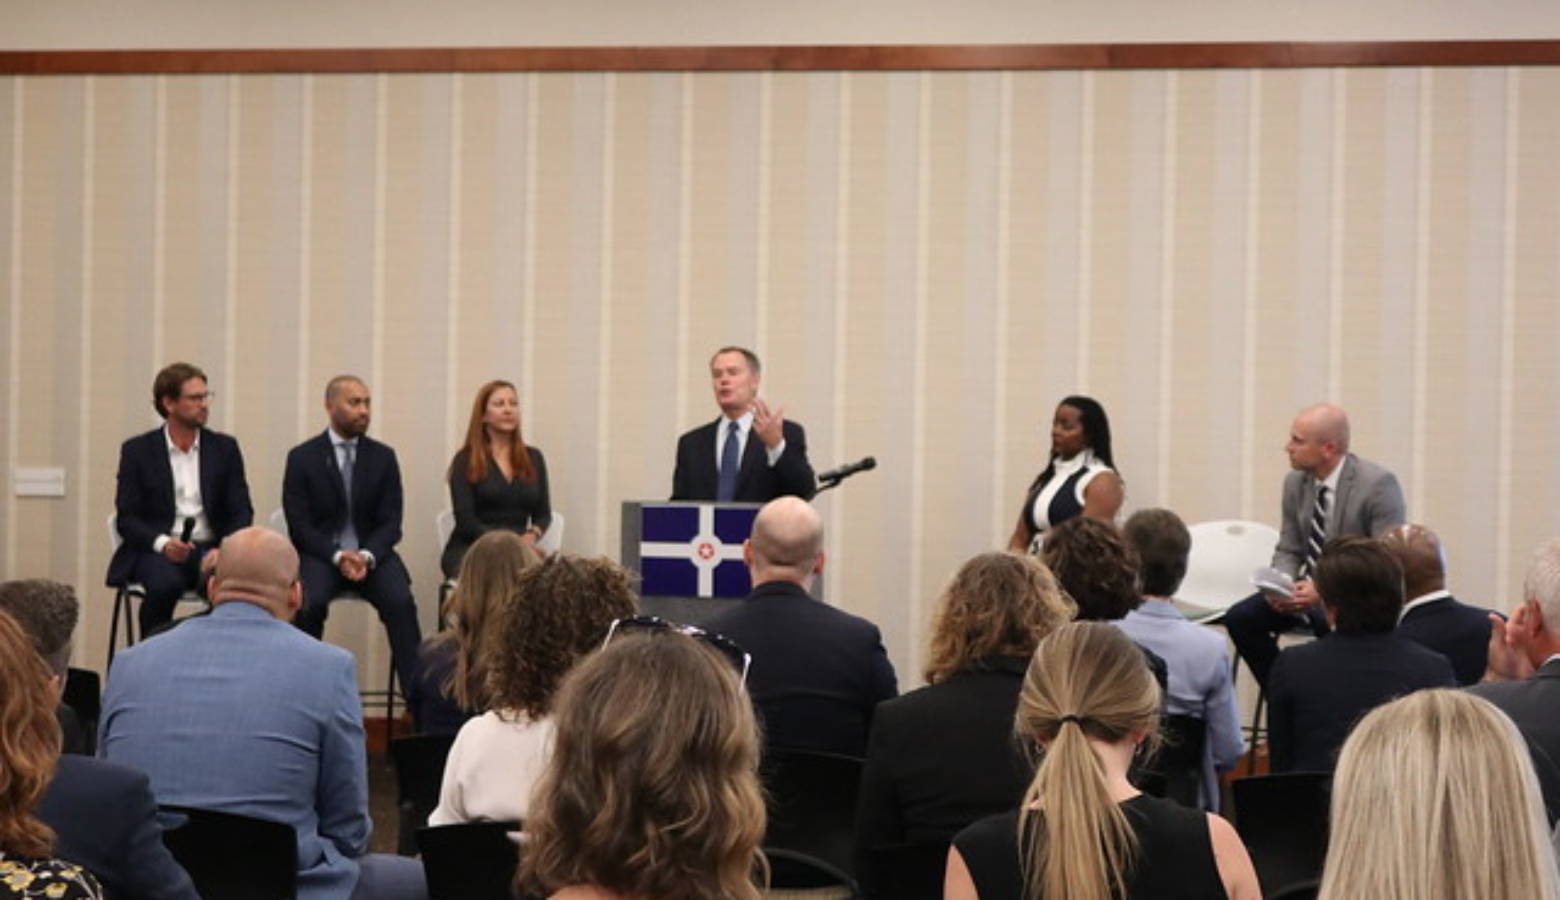 Indianapolis Mayor Joe Hogsett announces the economic plan for equitable jobs at a press conference on July 25. (Courtesy of The City of Indianapolis Mayor's Office)